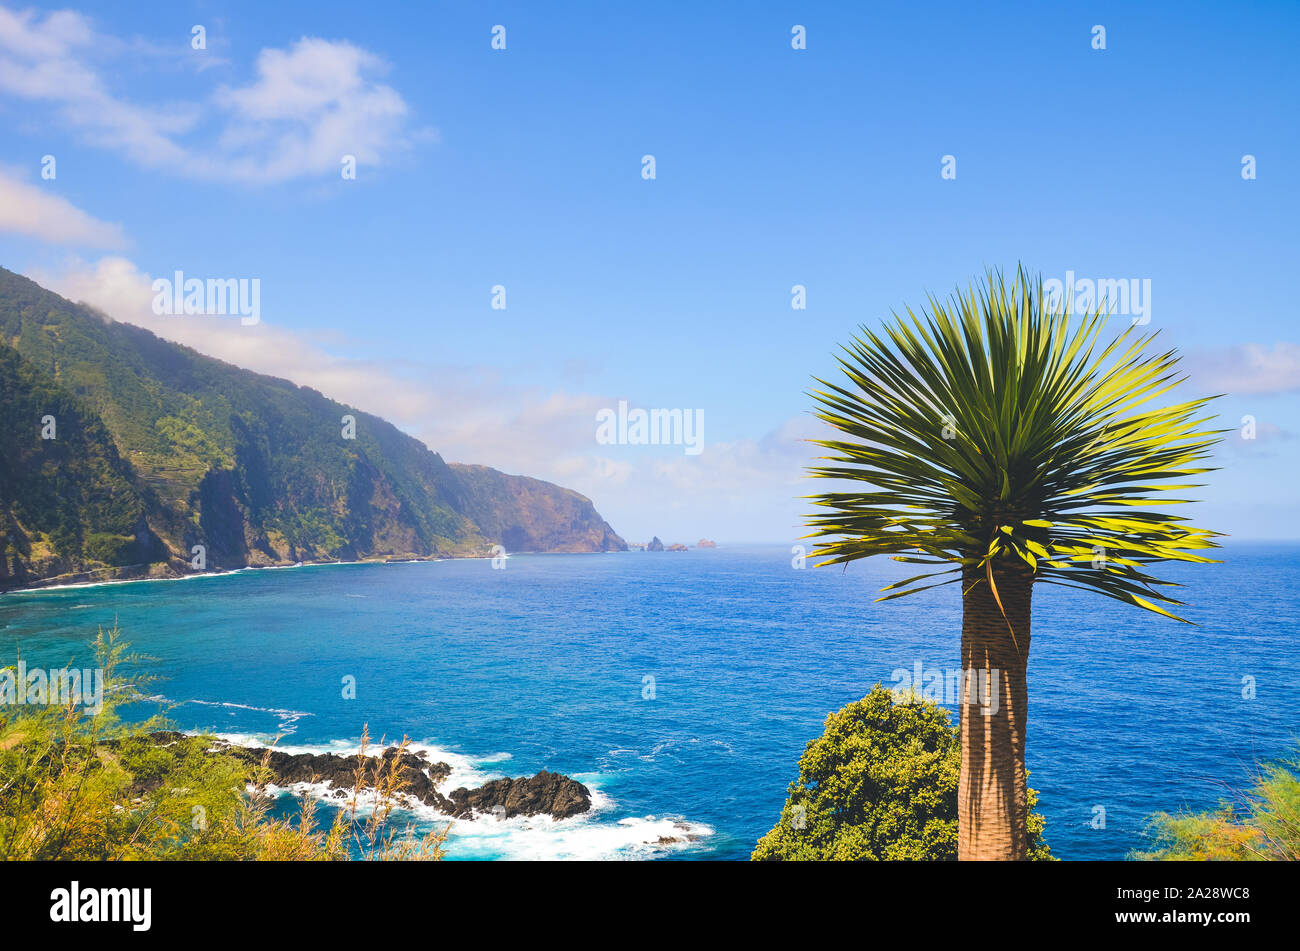 Amazing northern coast of Madeira Island, Portugal photographed with a tropical palm tree. Beautiful steep cliffs covered by green forest. Portuguese island in the Atlantic ocean. Stock Photo